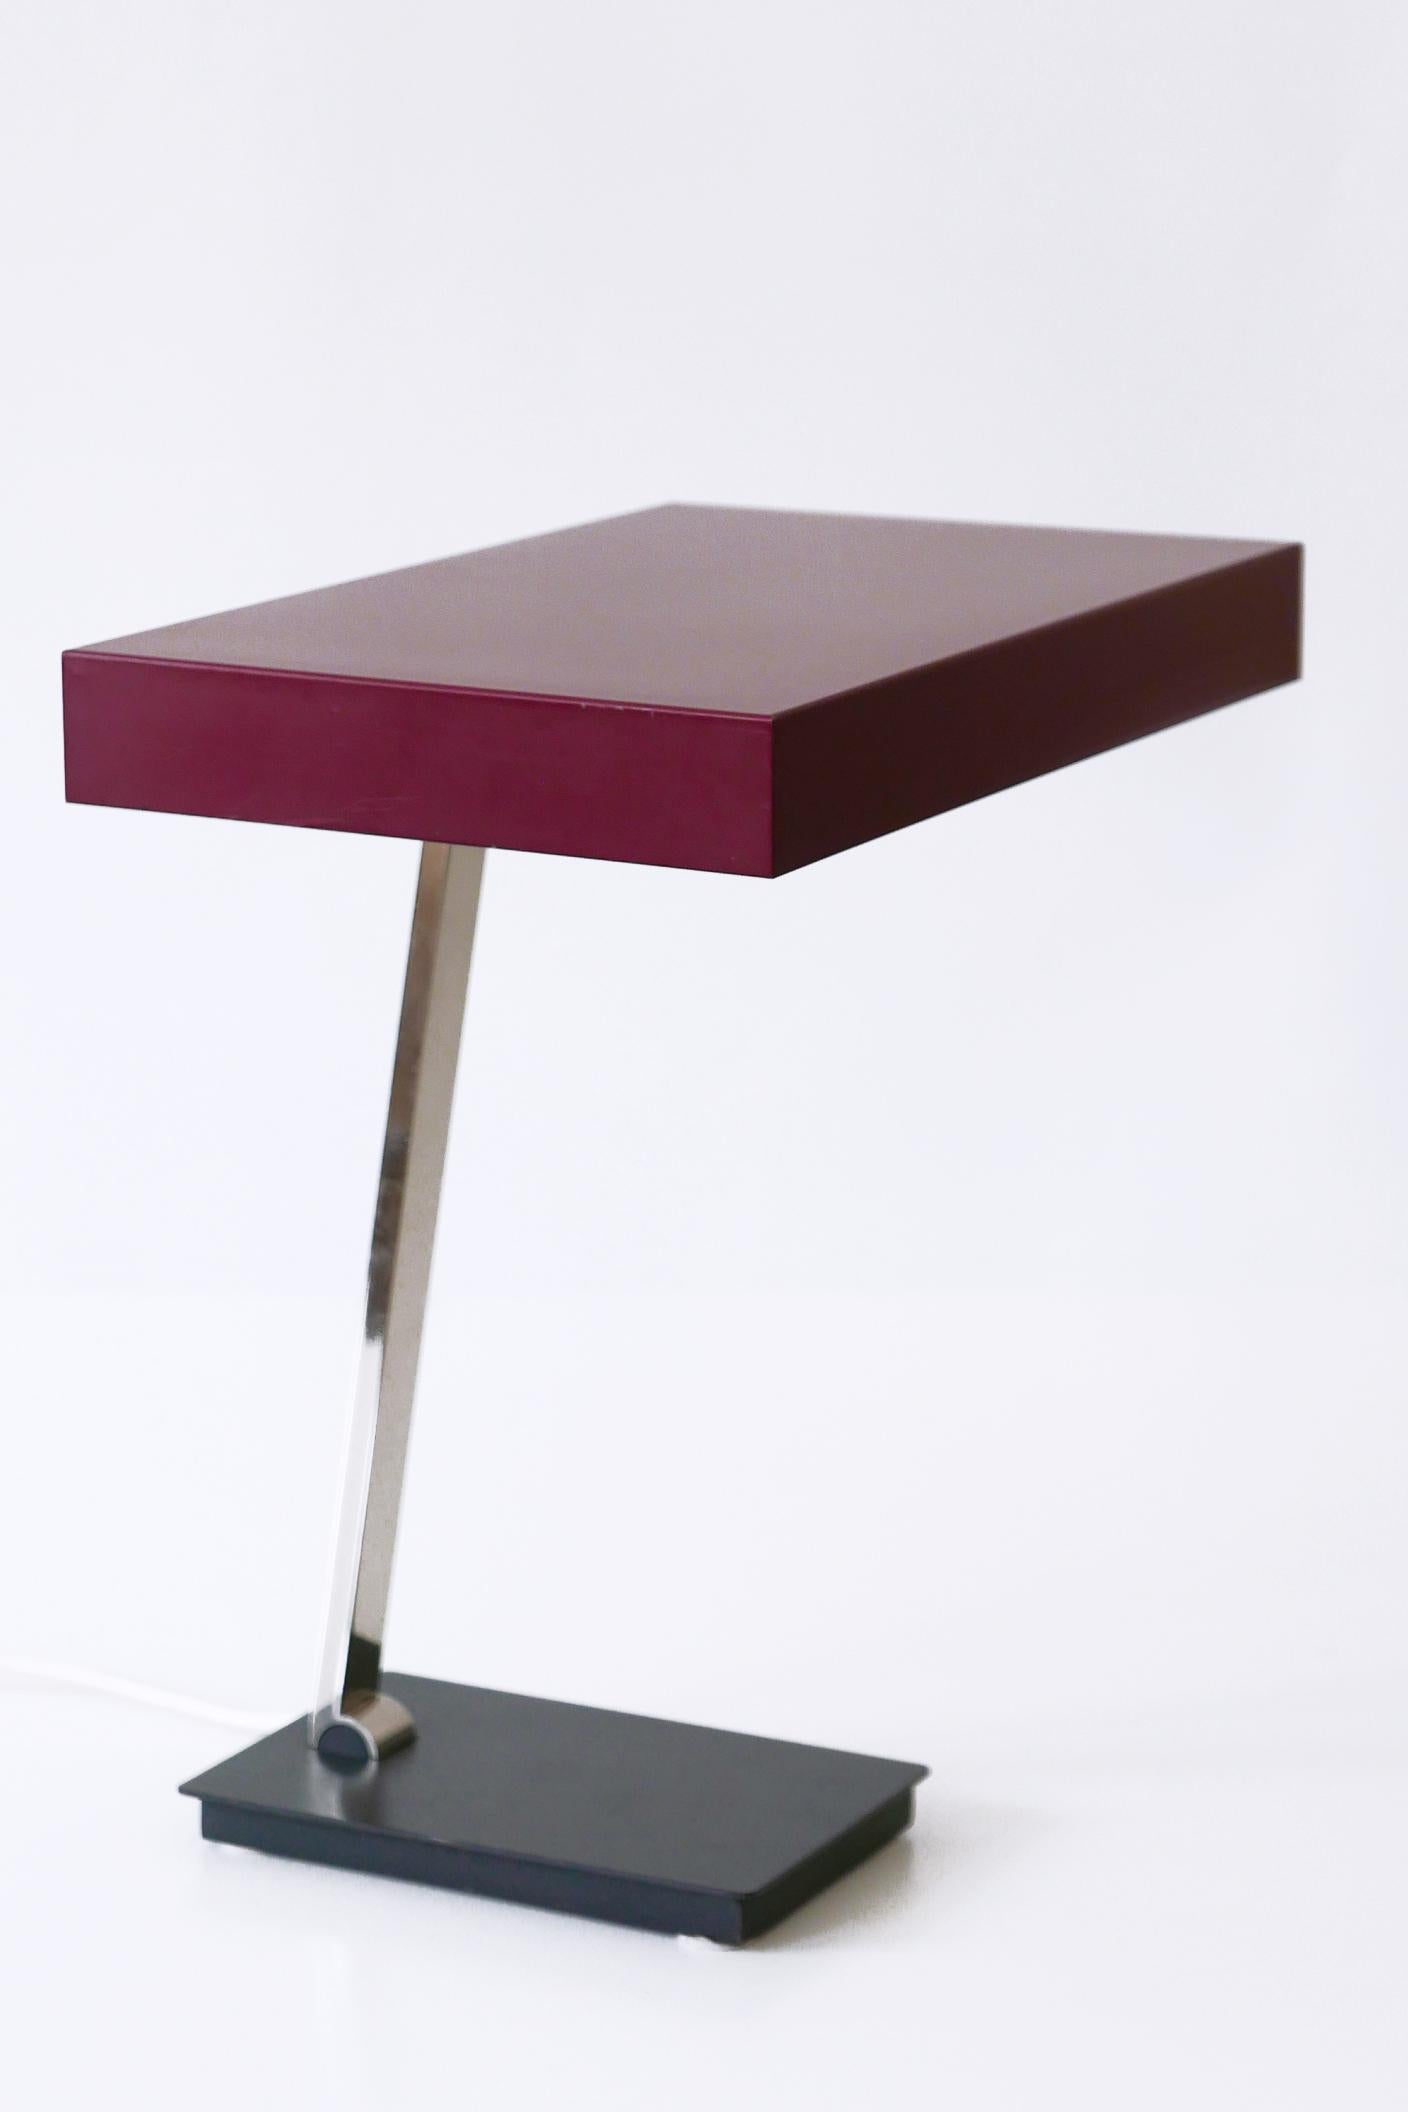 Gorgeous Mid-Century Modern luxury table lamp or desk light in Bordeaux color. Modell 6874. Manufactured by Kaiser Leuchten, 1960s, Germany. Adjustable arm and shade.

Executed in Bordeaux enameled steel, nickel-plated brass tube, the desk light